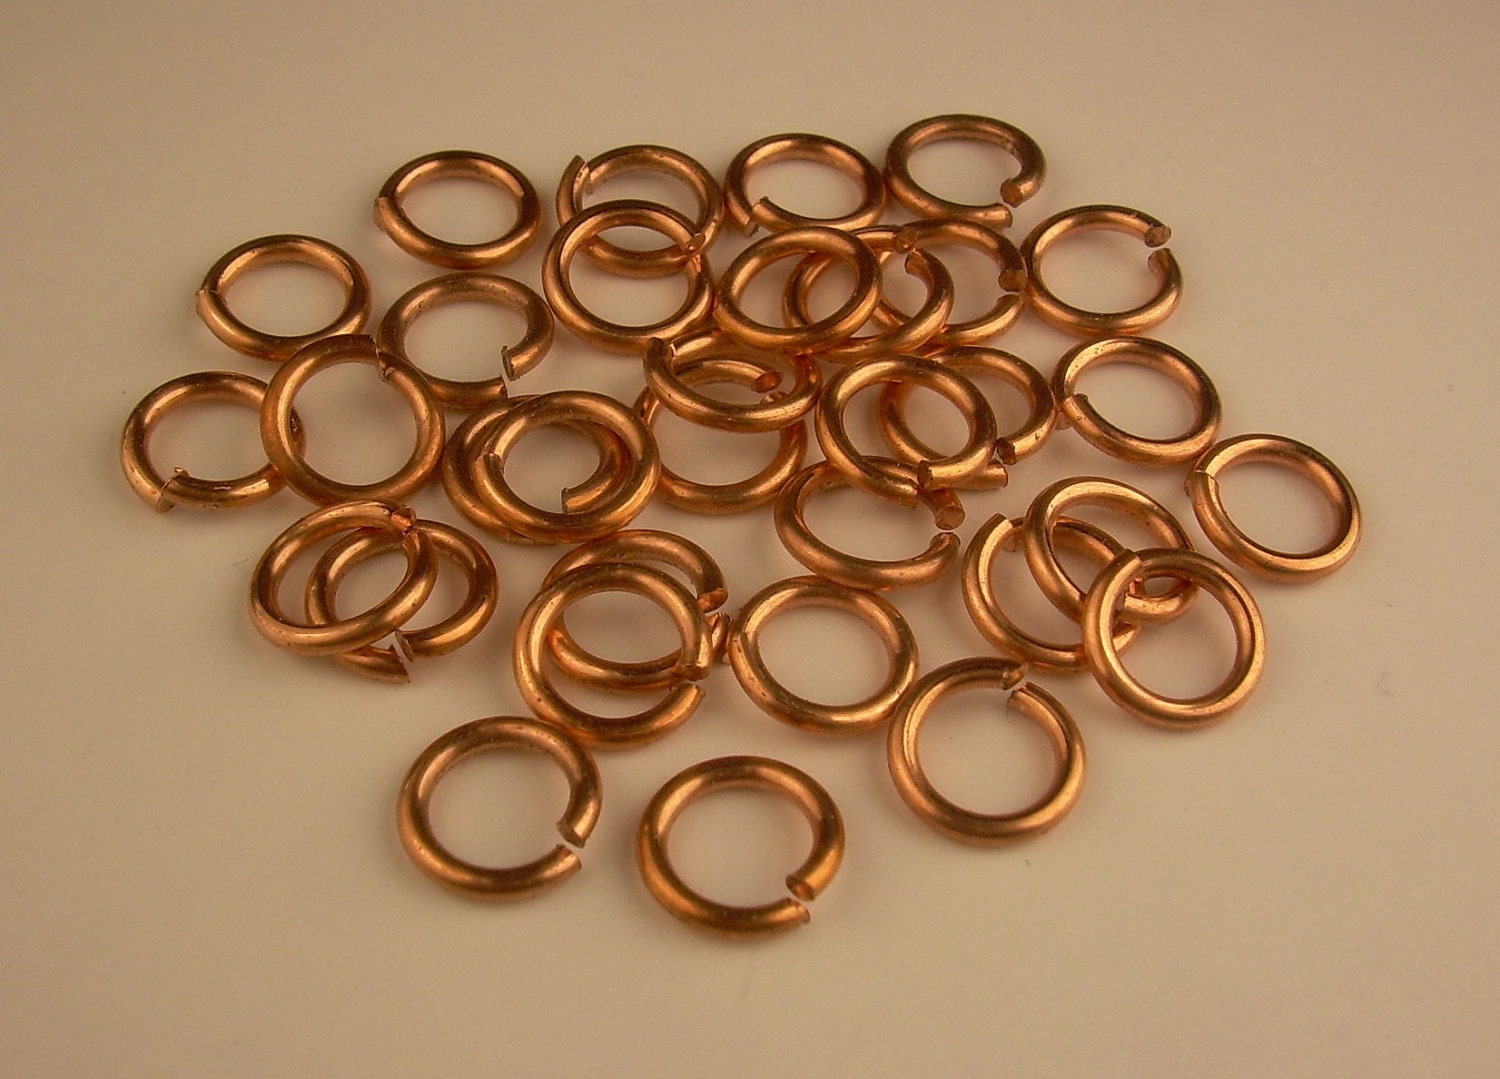 5 Creative Uses for Jump Rings in Jewelry Making - Halstead